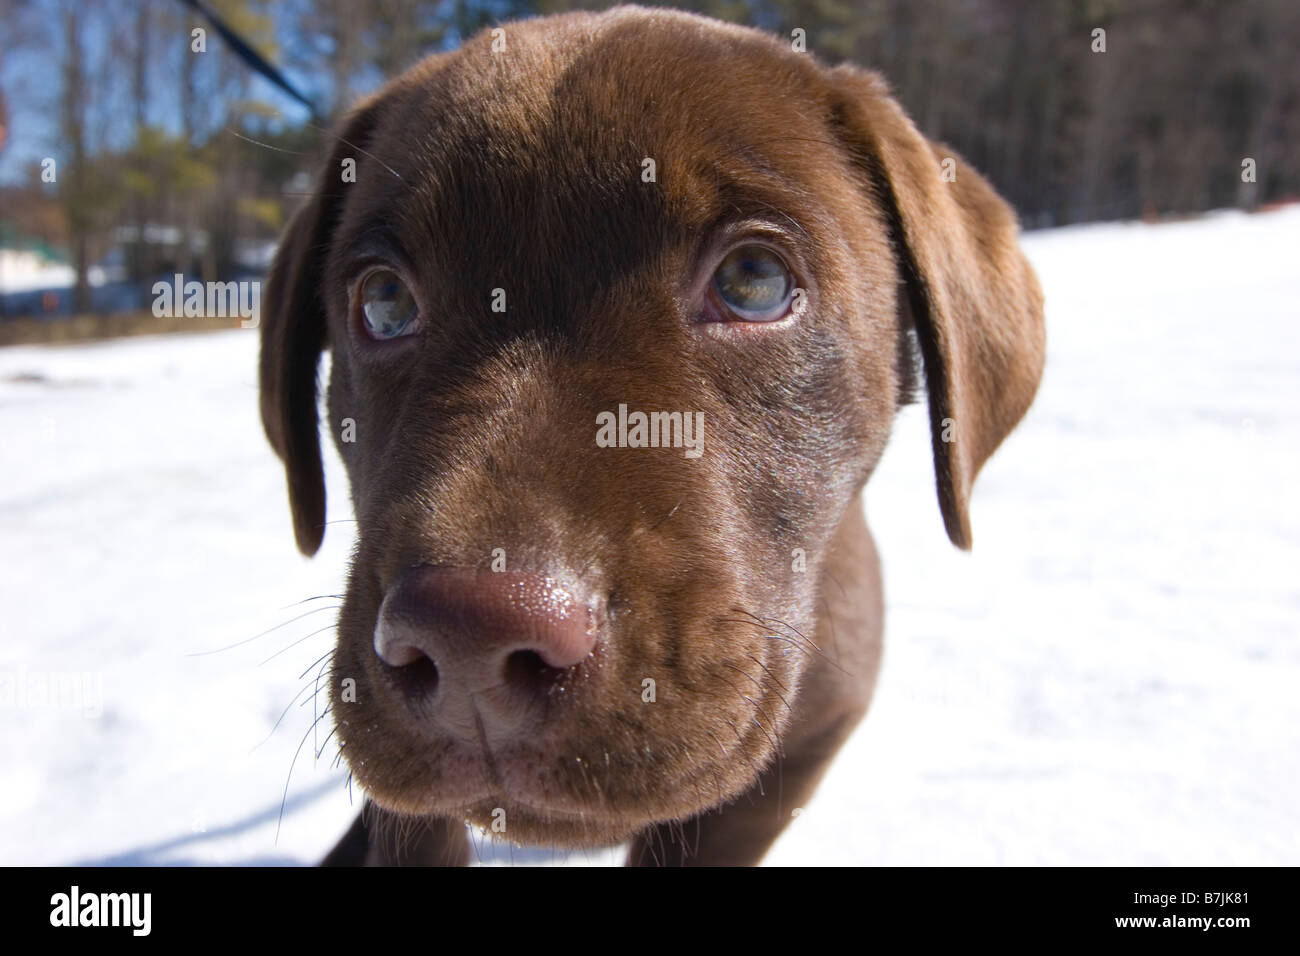 Cute chocolate Labrador puppy close up in the snow Stock Photo